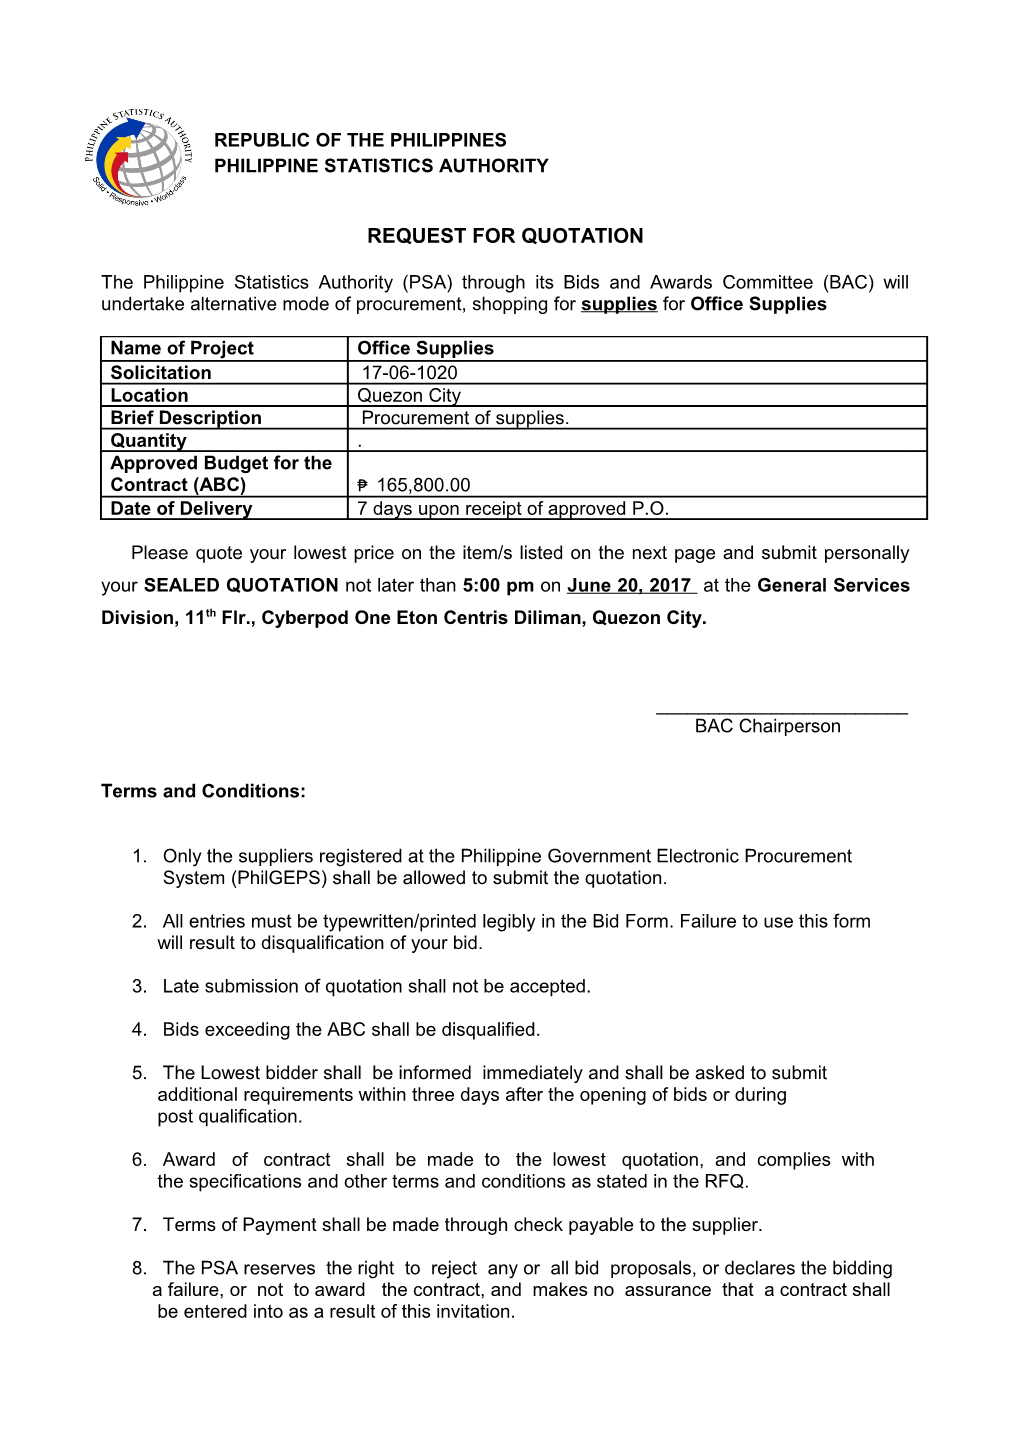 Request for Quotation s17